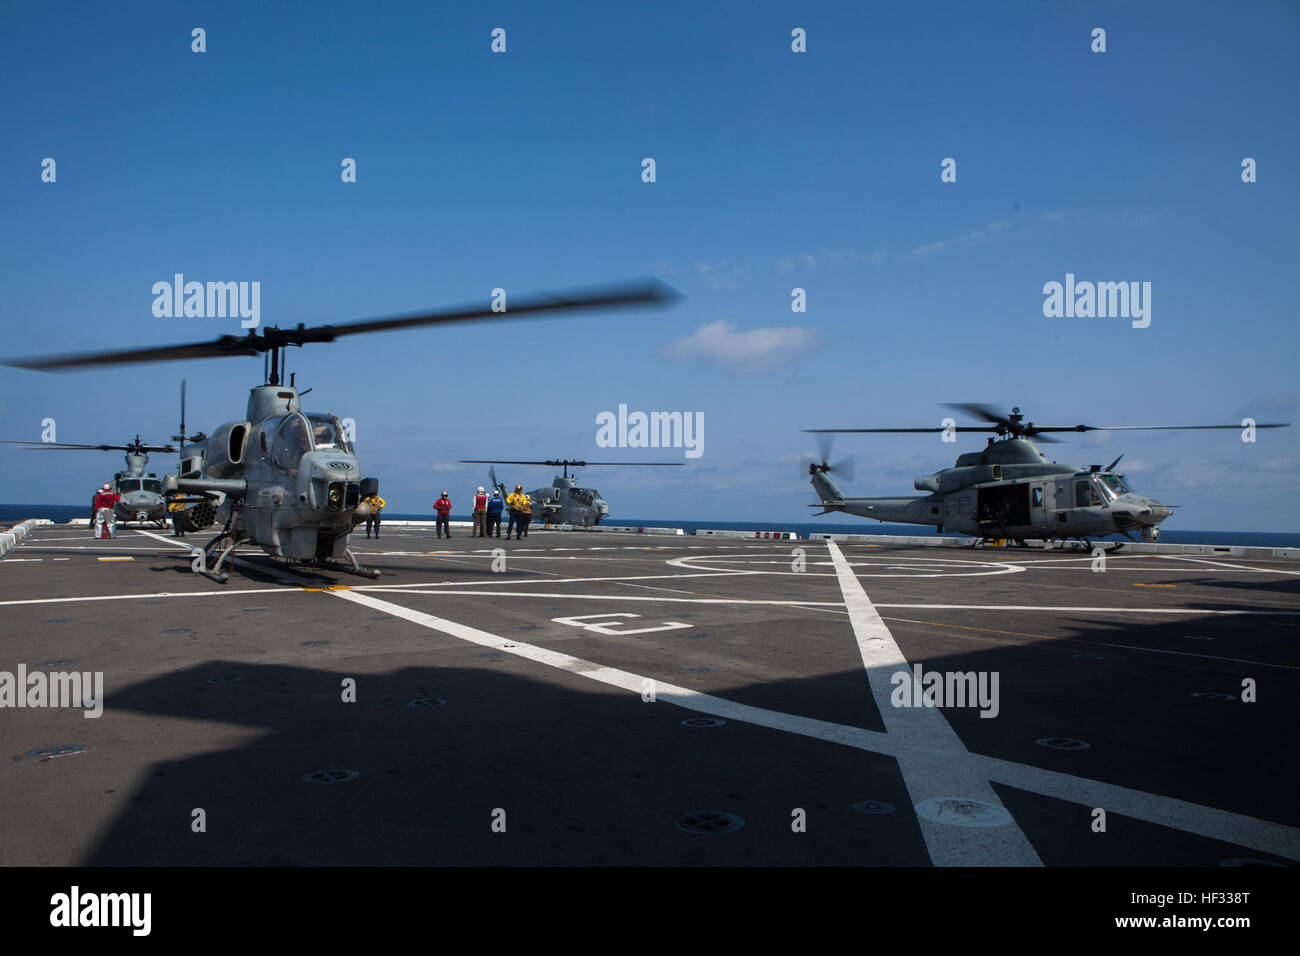 U.S. Marine Corps UH-1Y Hueys and AH-1 Super Cobras assigned to Marine Medium Tiltrotor Squadron 262 (Reinforced), 31st Marine Expeditionary Unit (MEU), prepare to take off from the flight deck of the USS Green Bay (LPD 20) while out at sea, March 11, 2015. The 31st MEU is currently conducting its Spring Patrol of the Asia-Pacific region. (U.S. Marine Corps photo by GySgt Ismael Pena/Released) VMM 262 (Rein) aboard the USS Green Bay 150314-M-CX588-032 Stock Photo